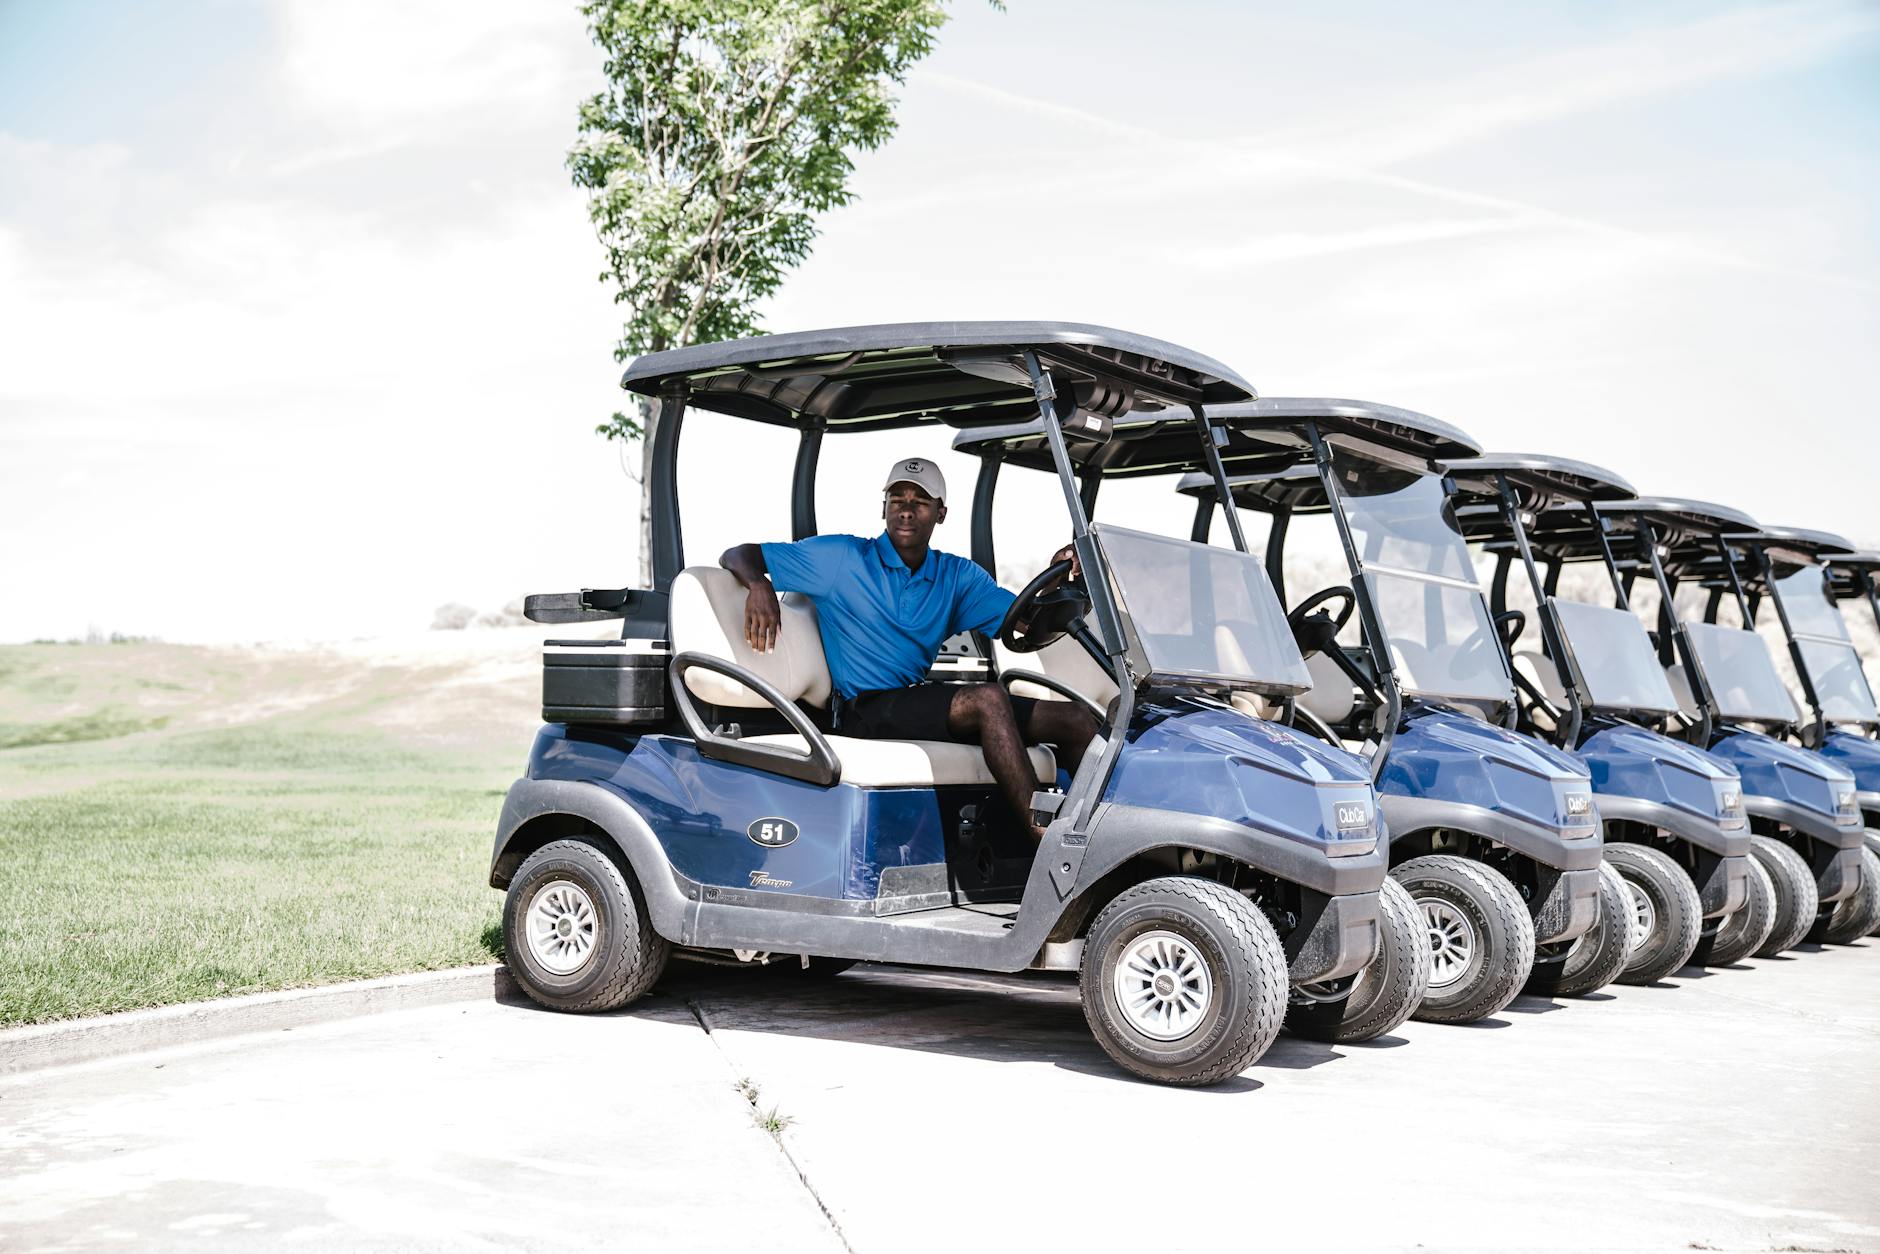 Man in Blue Shirt and Black Shorts Outfit Riding on Blue Golf Cart